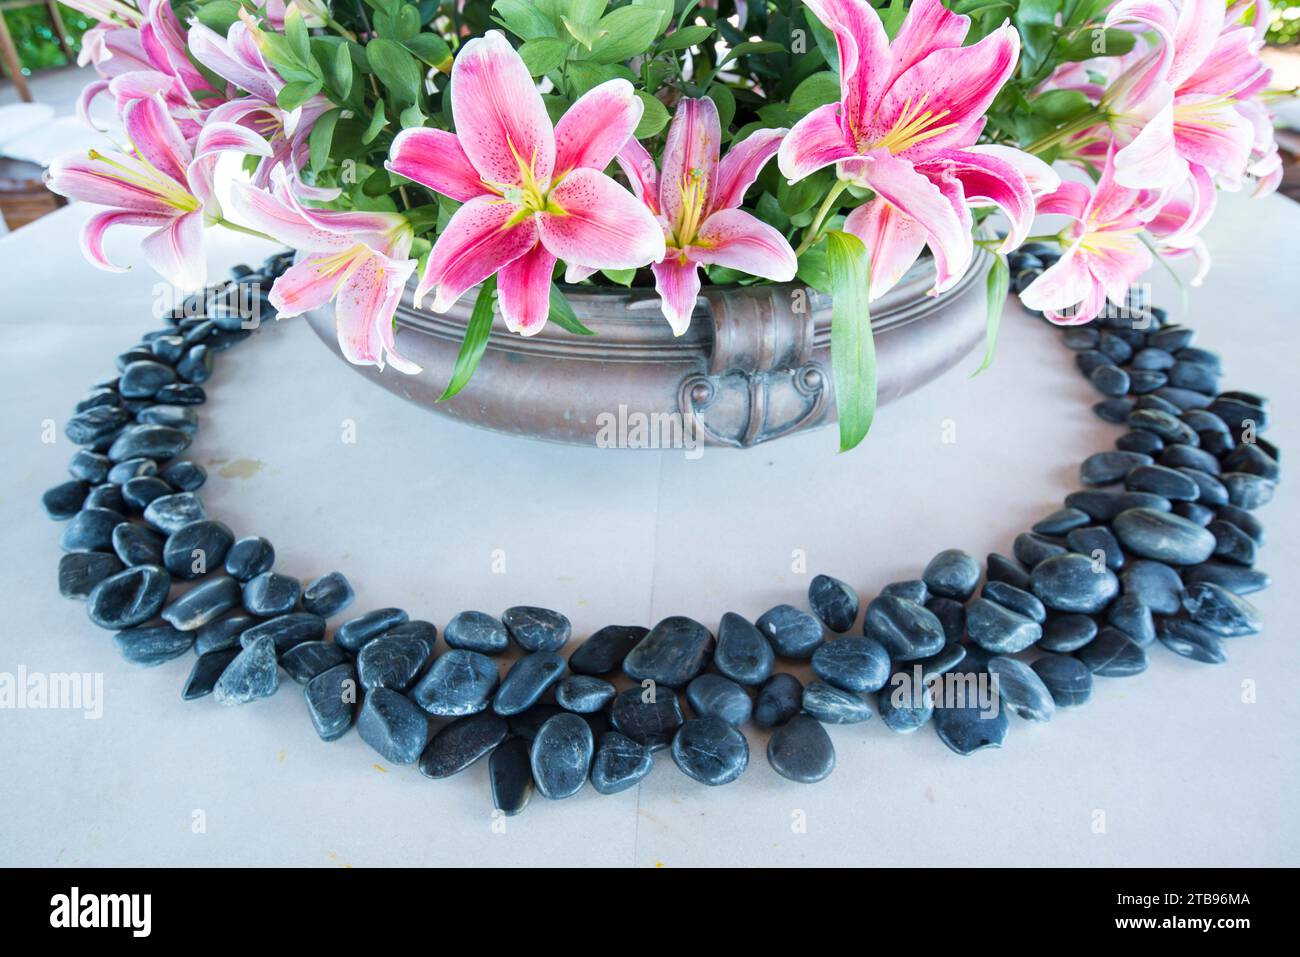 Polished black stones ring a bouquet of pink lilies; Republic of the Maldives Stock Photo